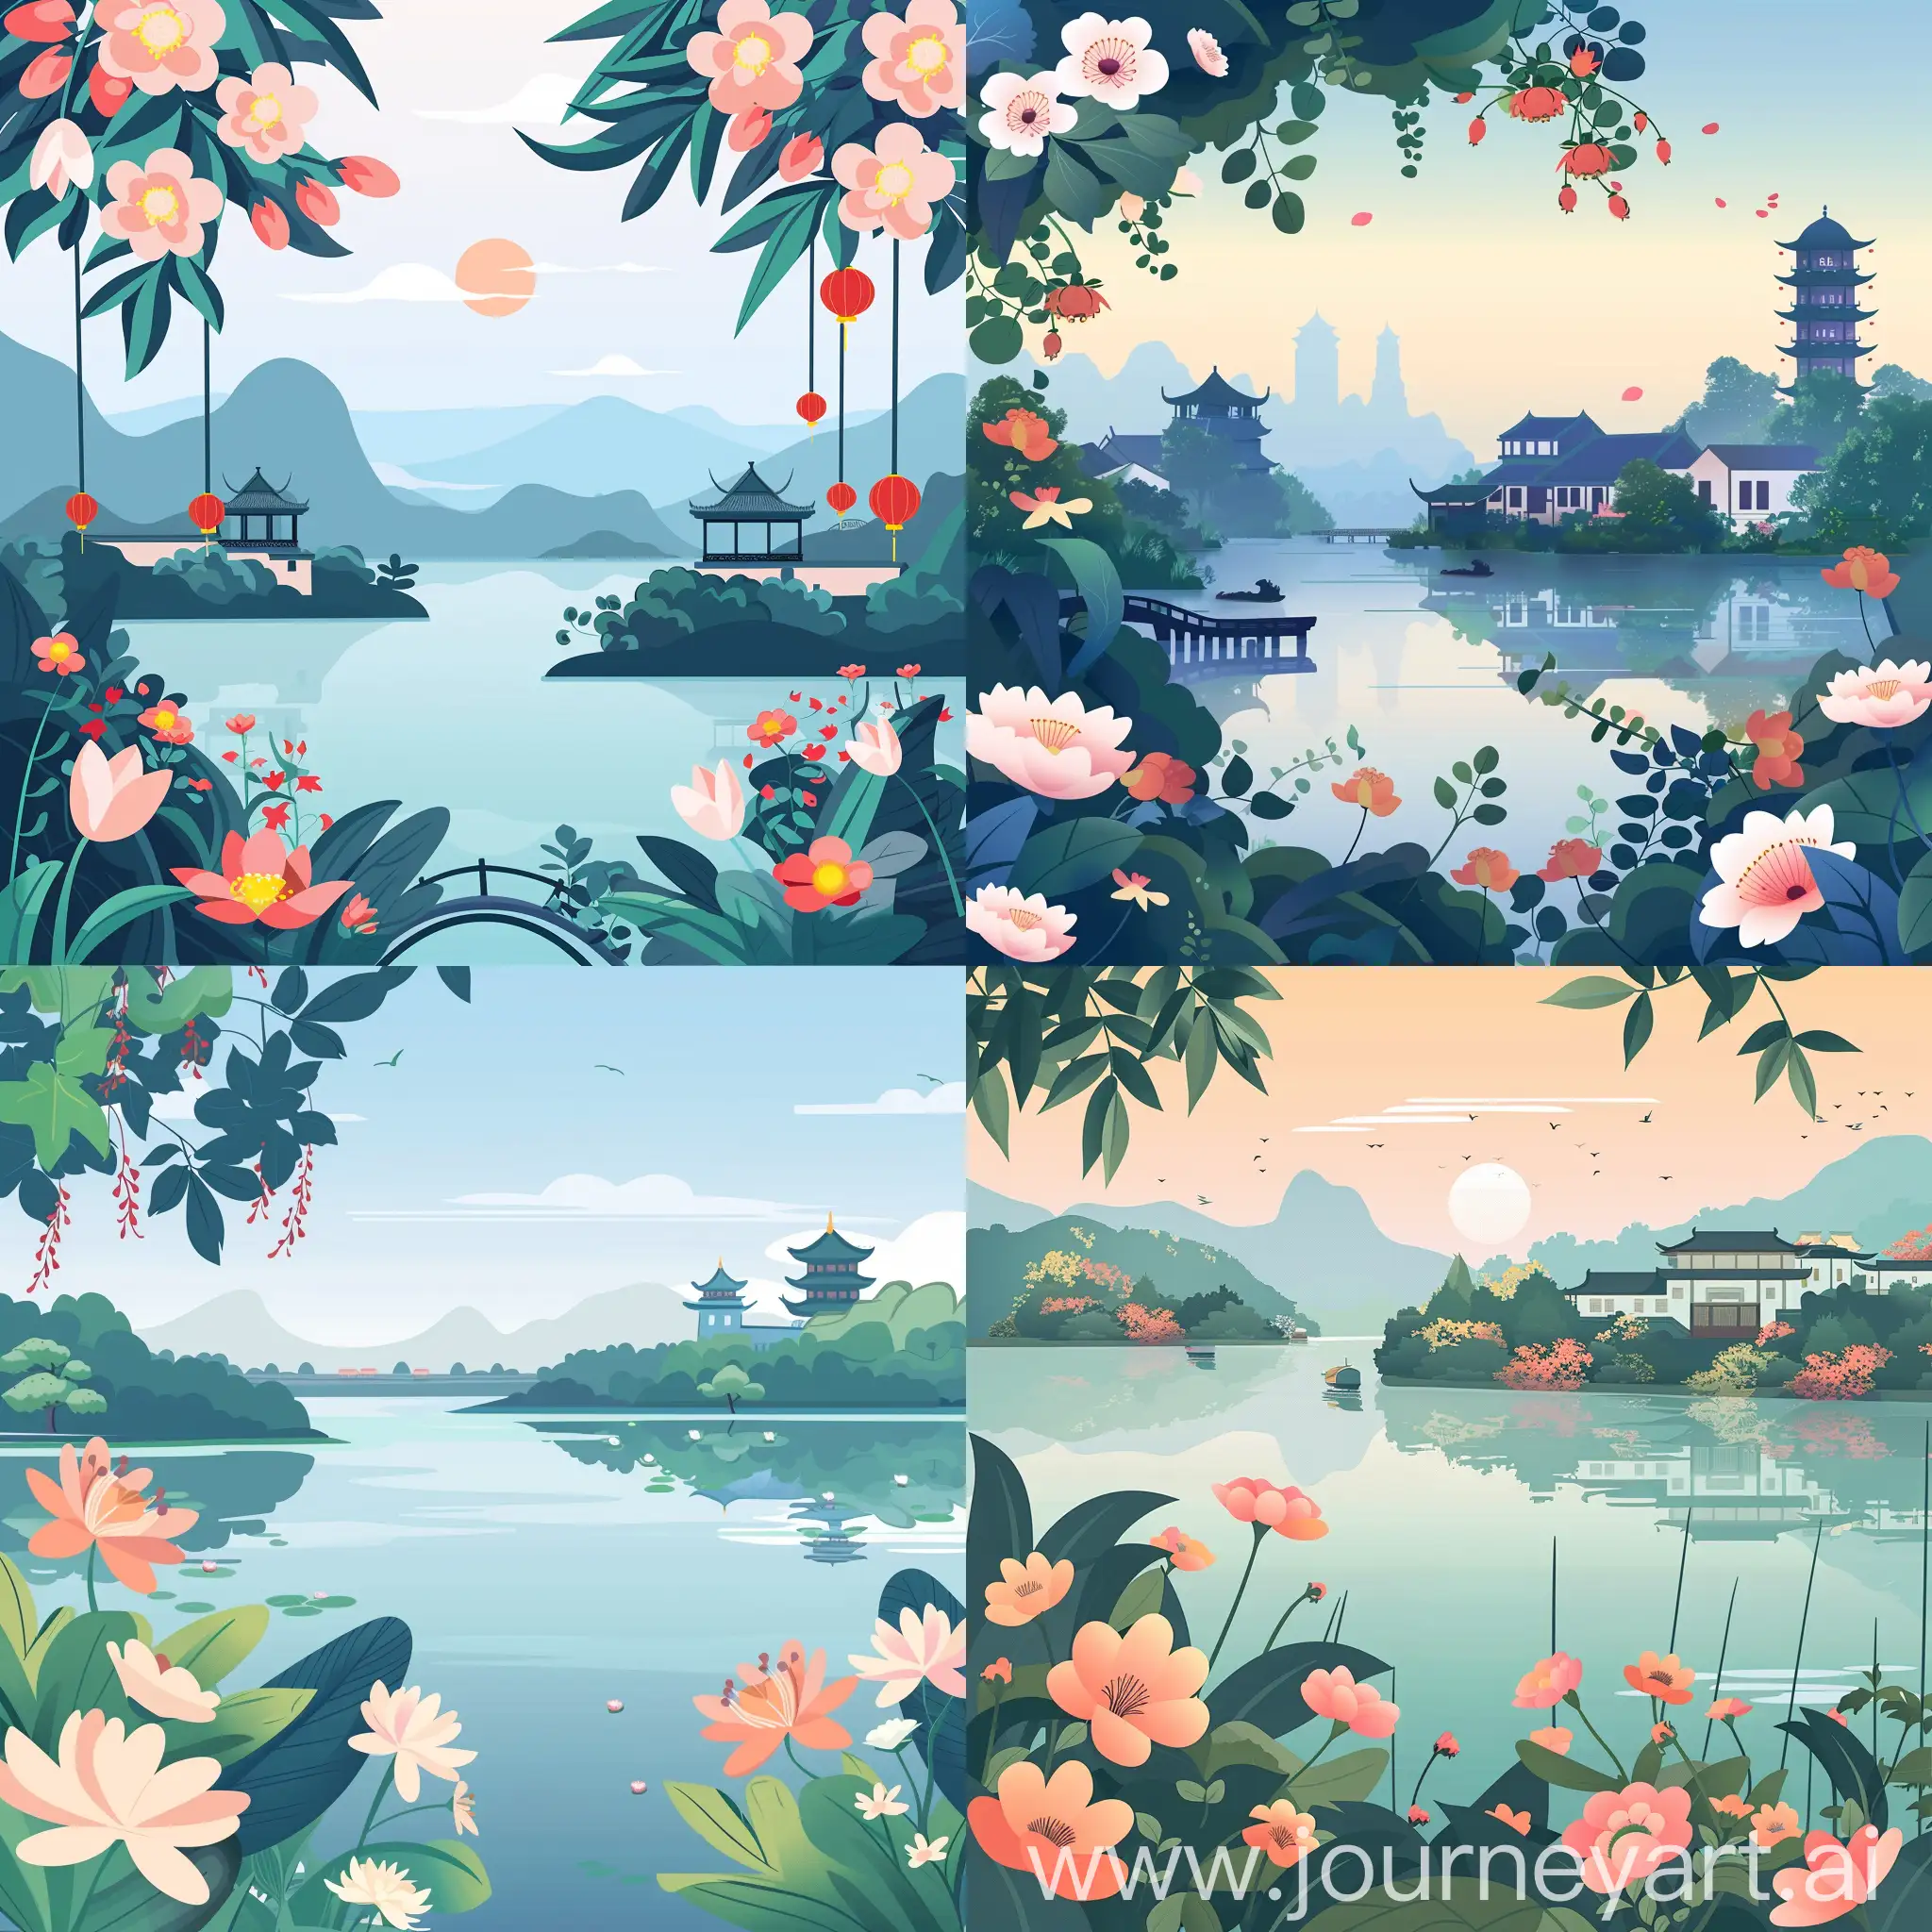 Vibrant-Daytime-Illustration-of-Beautiful-Hangzhou-with-Floral-Scenery